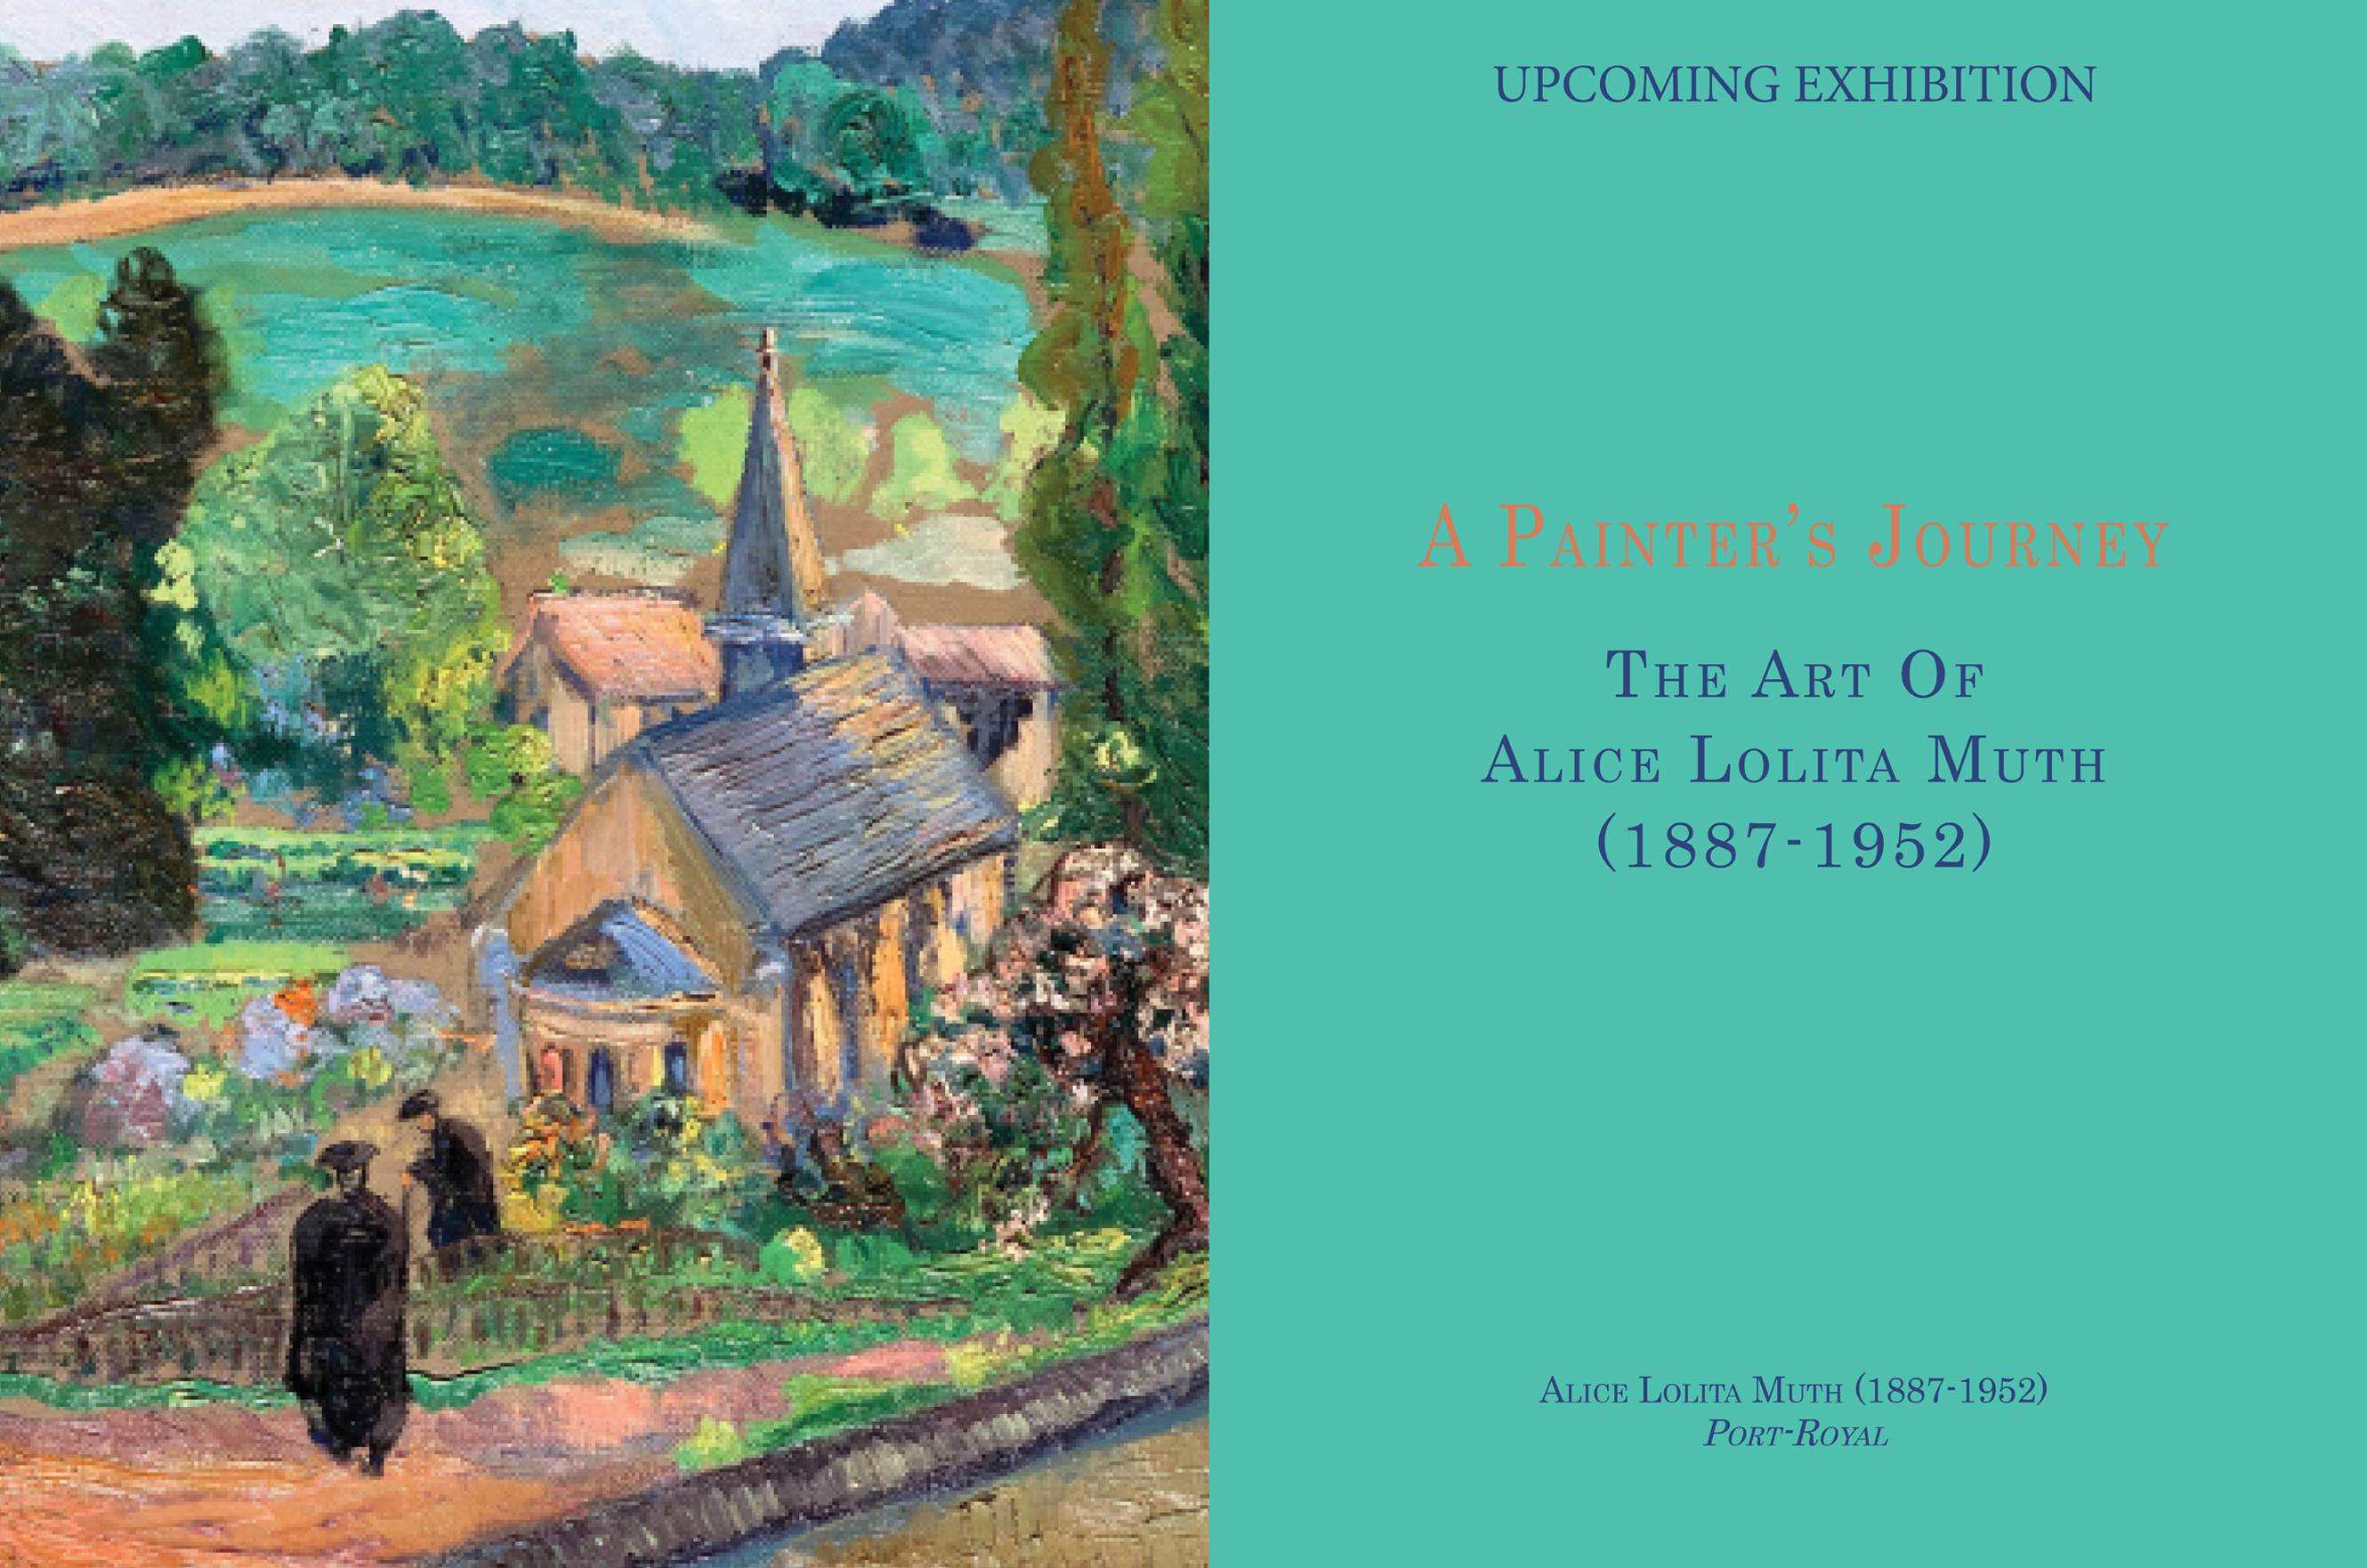 A Painters Journey: The Art of Alice Lolita Muth (1887-1952)